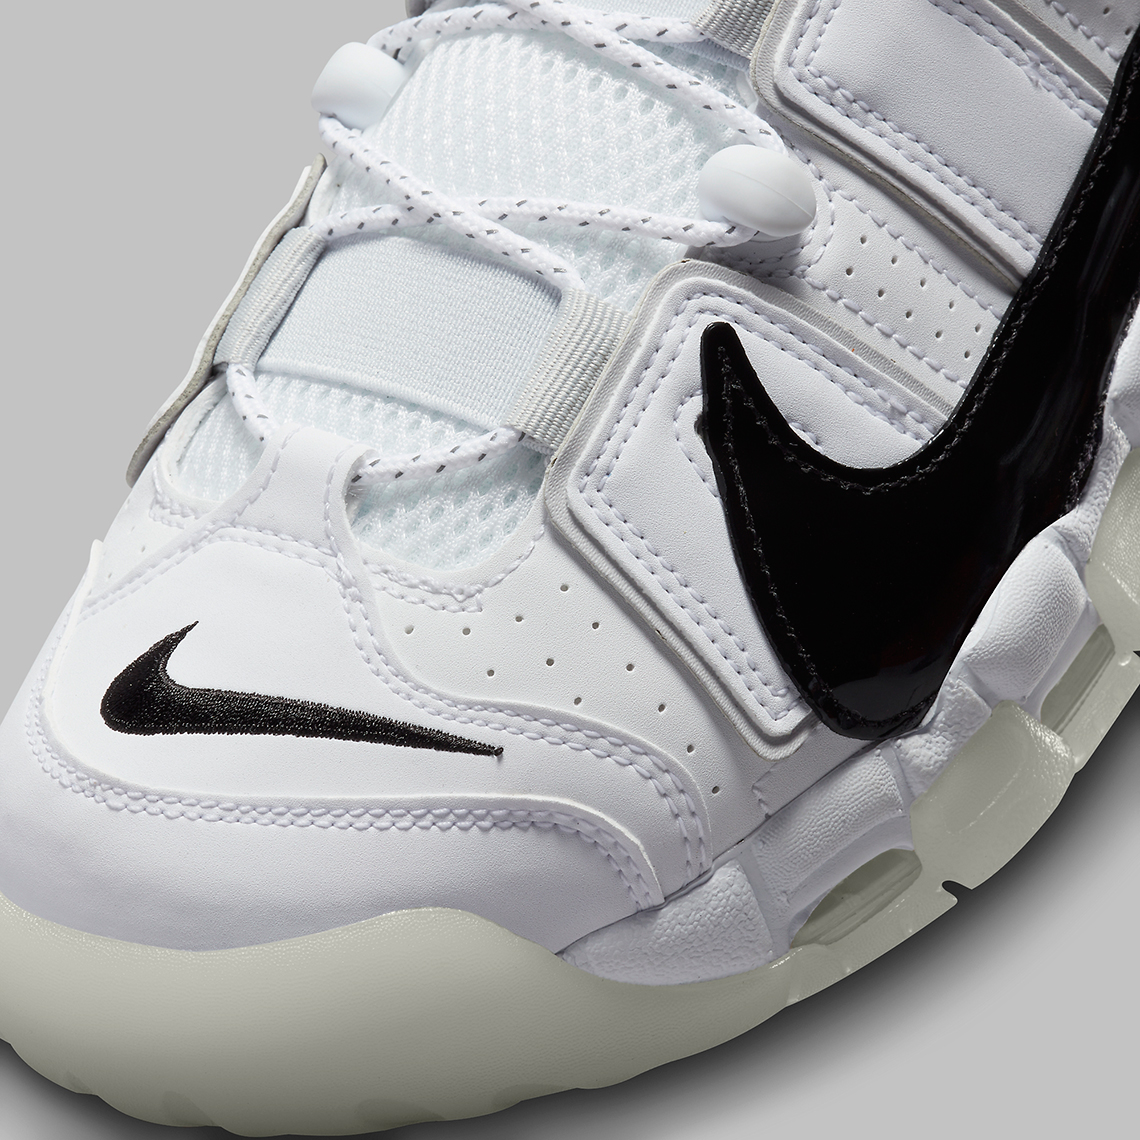 Nike nike air more uptempo 96 black and white Air More Uptempo "Copy Paste" White Black Photon Dust Vast